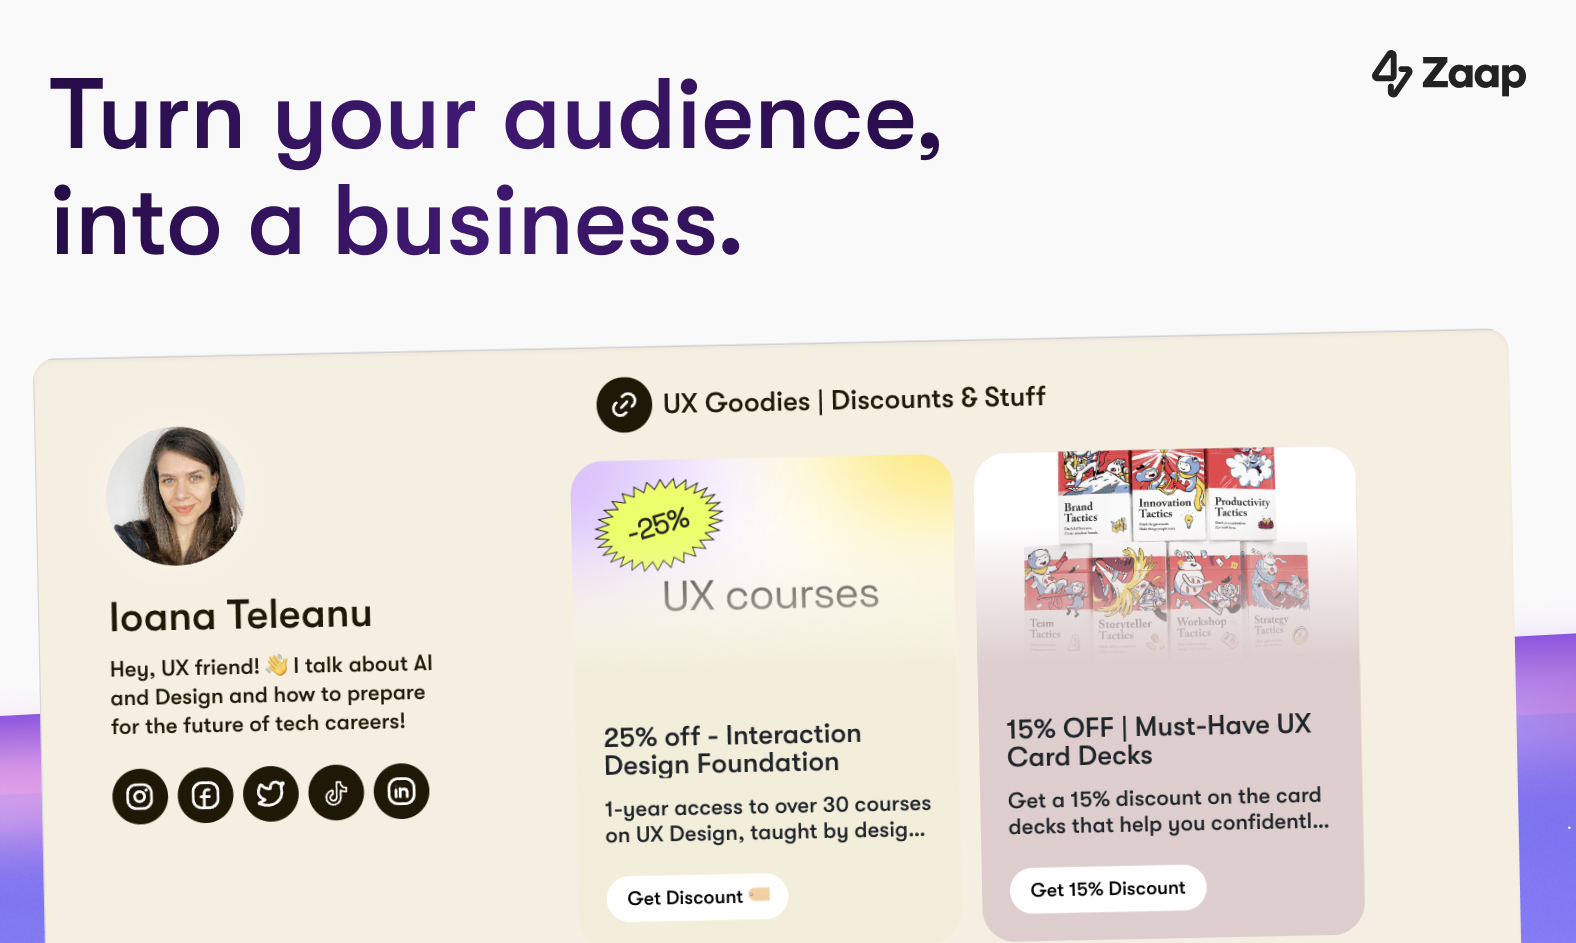 zaap-2-0 - Turn Your Audience Into A Business